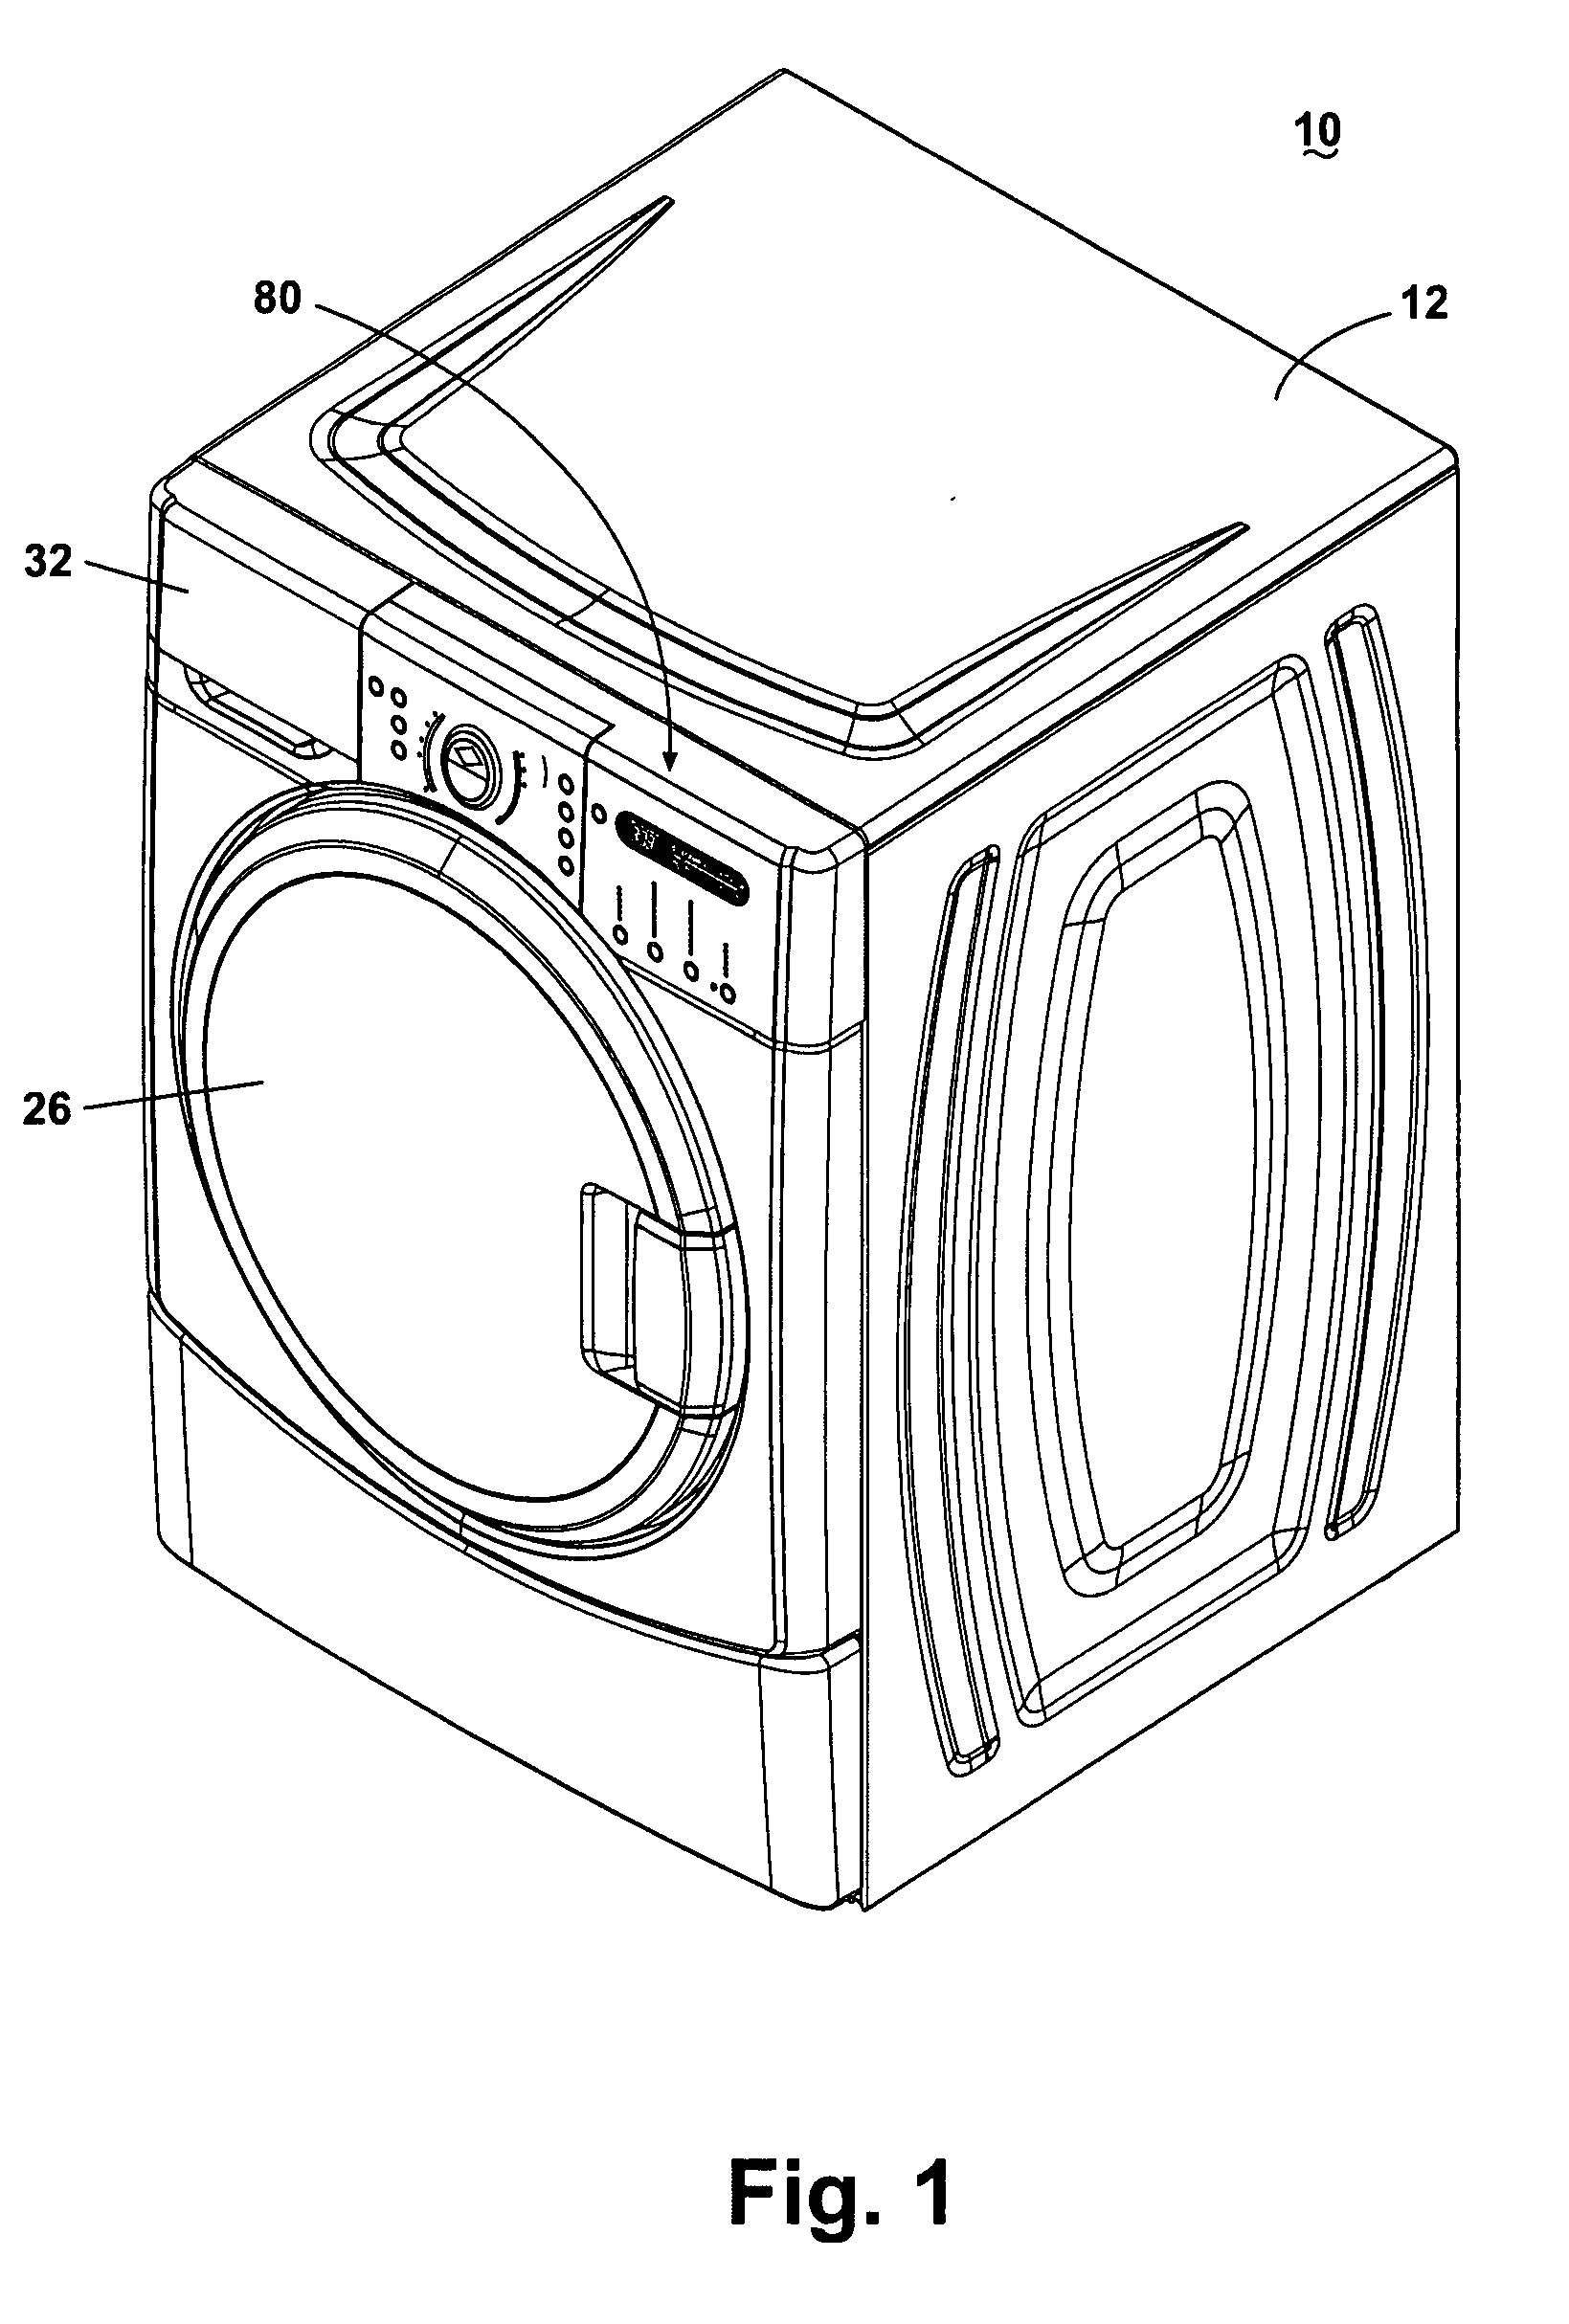 Method for Detecting Abnormality in a Fabric Treatment Appliance Having a Steam Generator